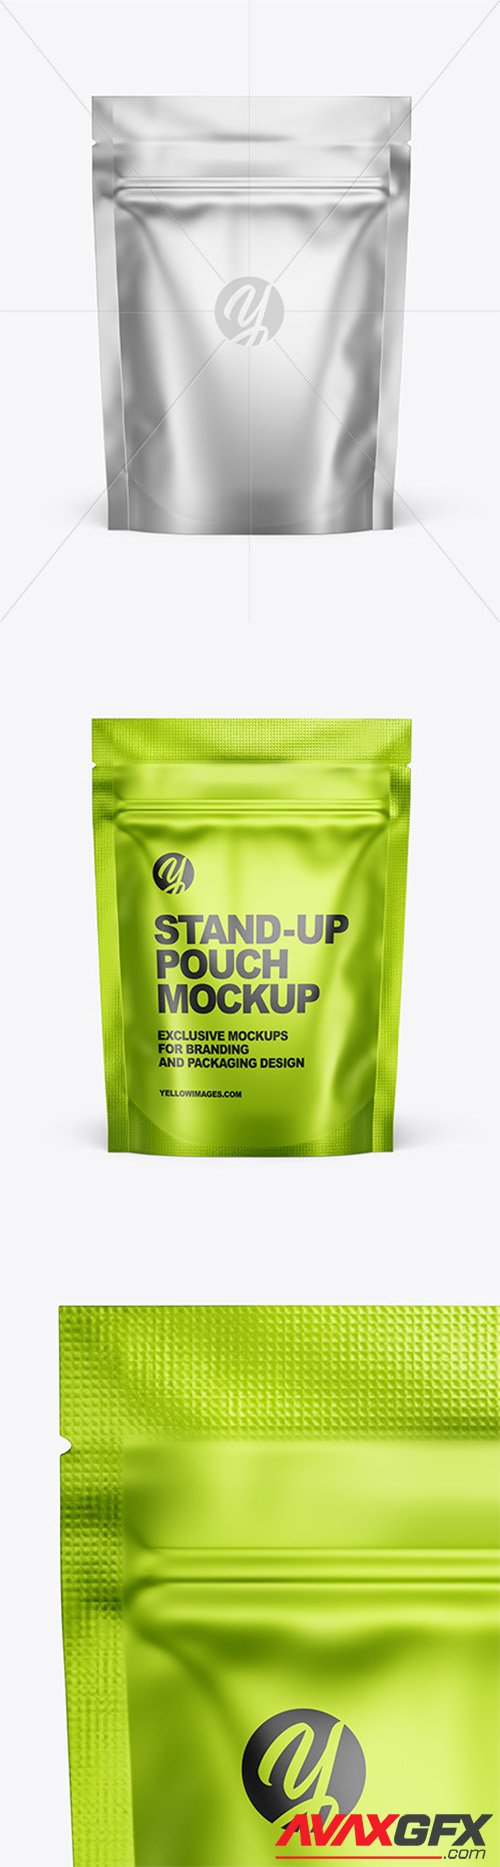 Metallic Stand-up Pouch Mockup 57563